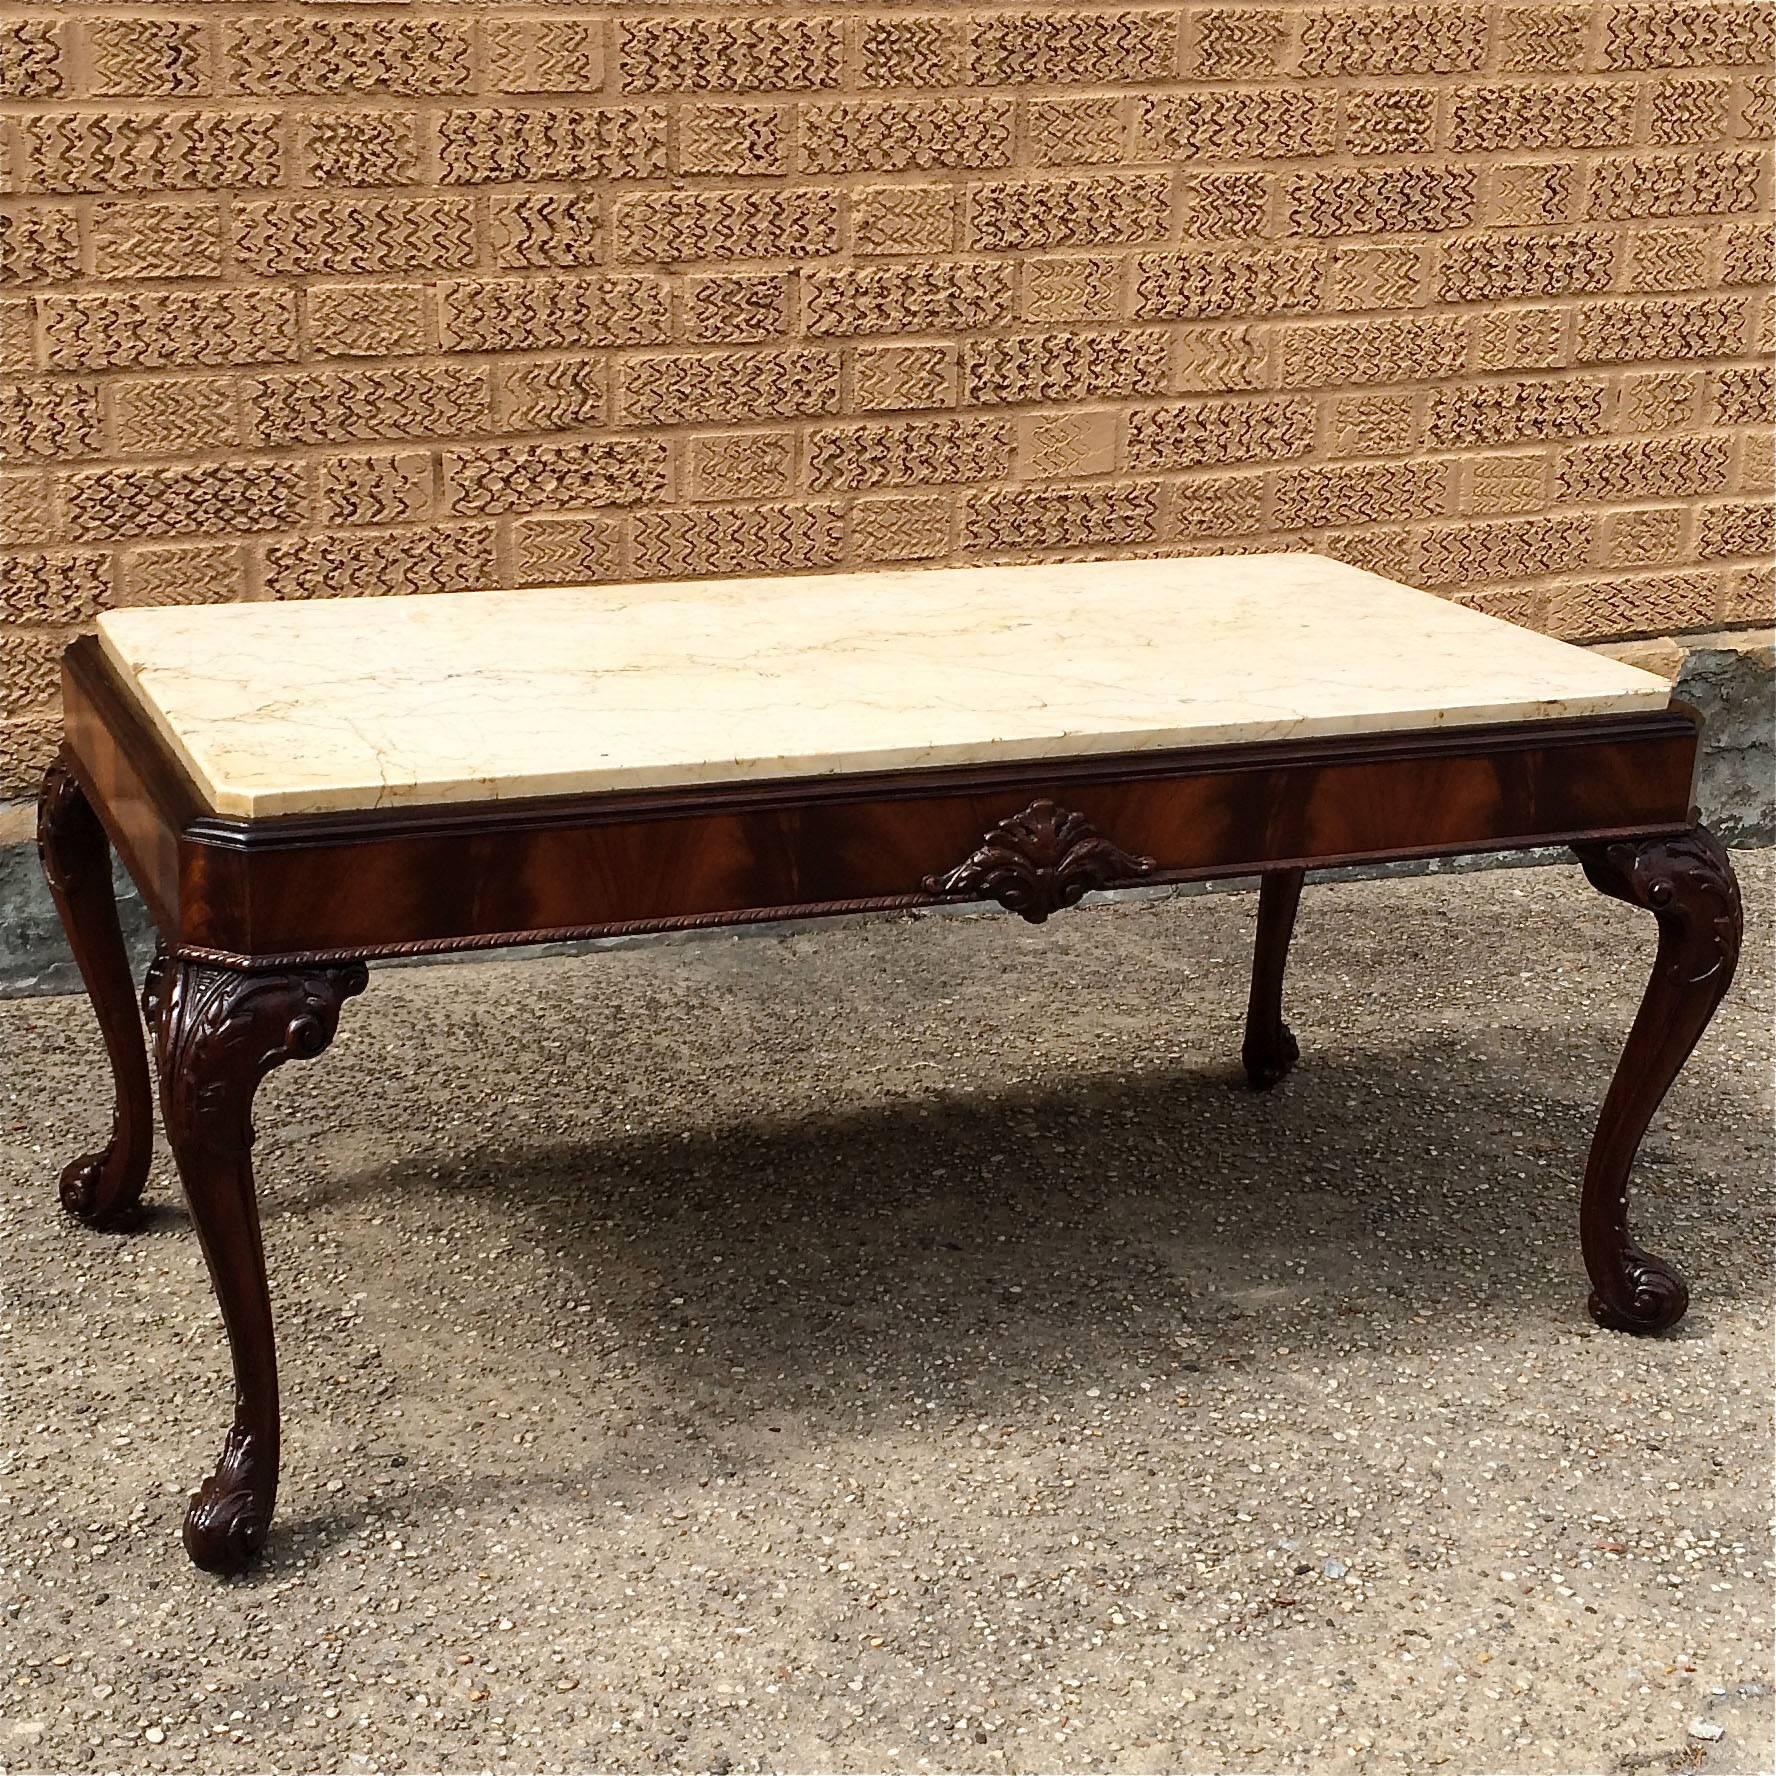 Antique, carved, flame mahogany coffee table with marble top and cabriole legs. Frame is newly restored and marble is original.